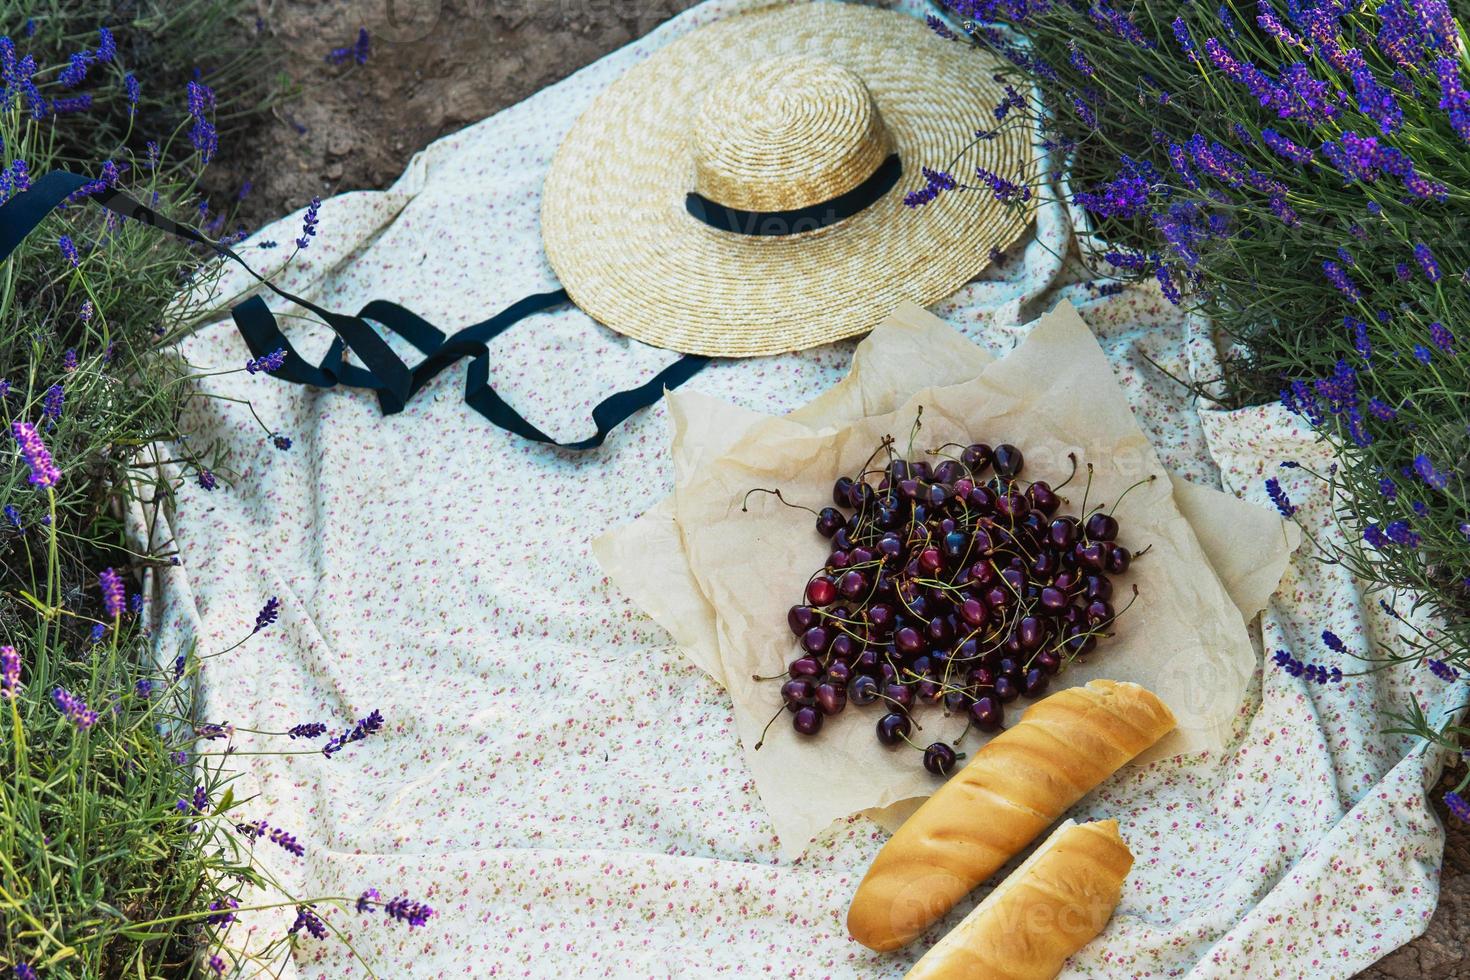 Cherry berries and baguette on the blanket during picnic in the lavender field photo